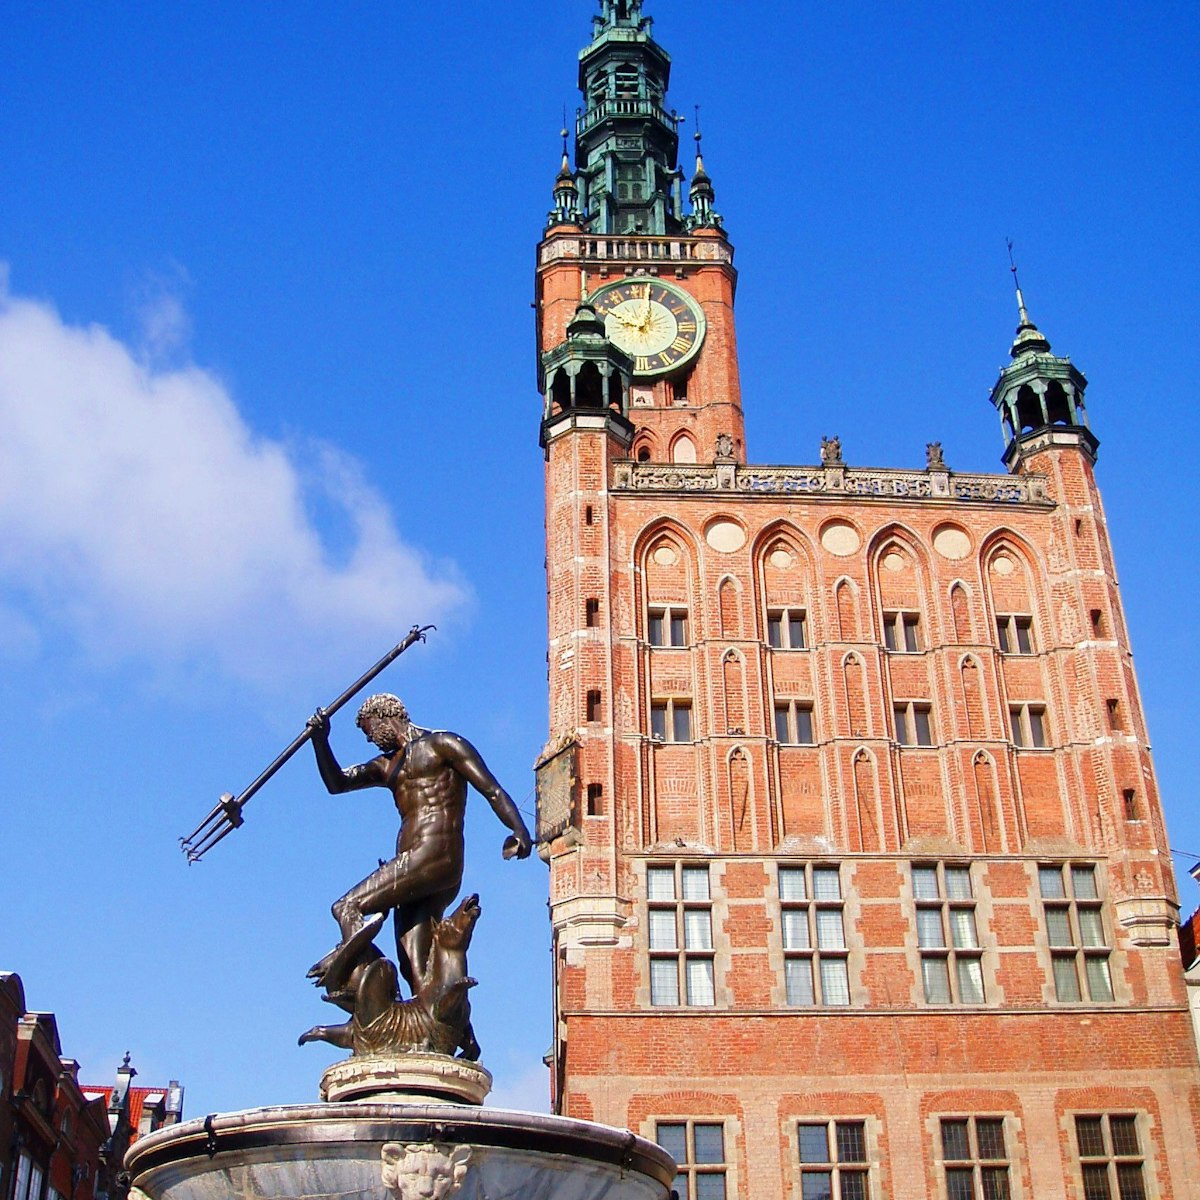 Statue of Neptune in front of the town hall in Gdansk, Poland.